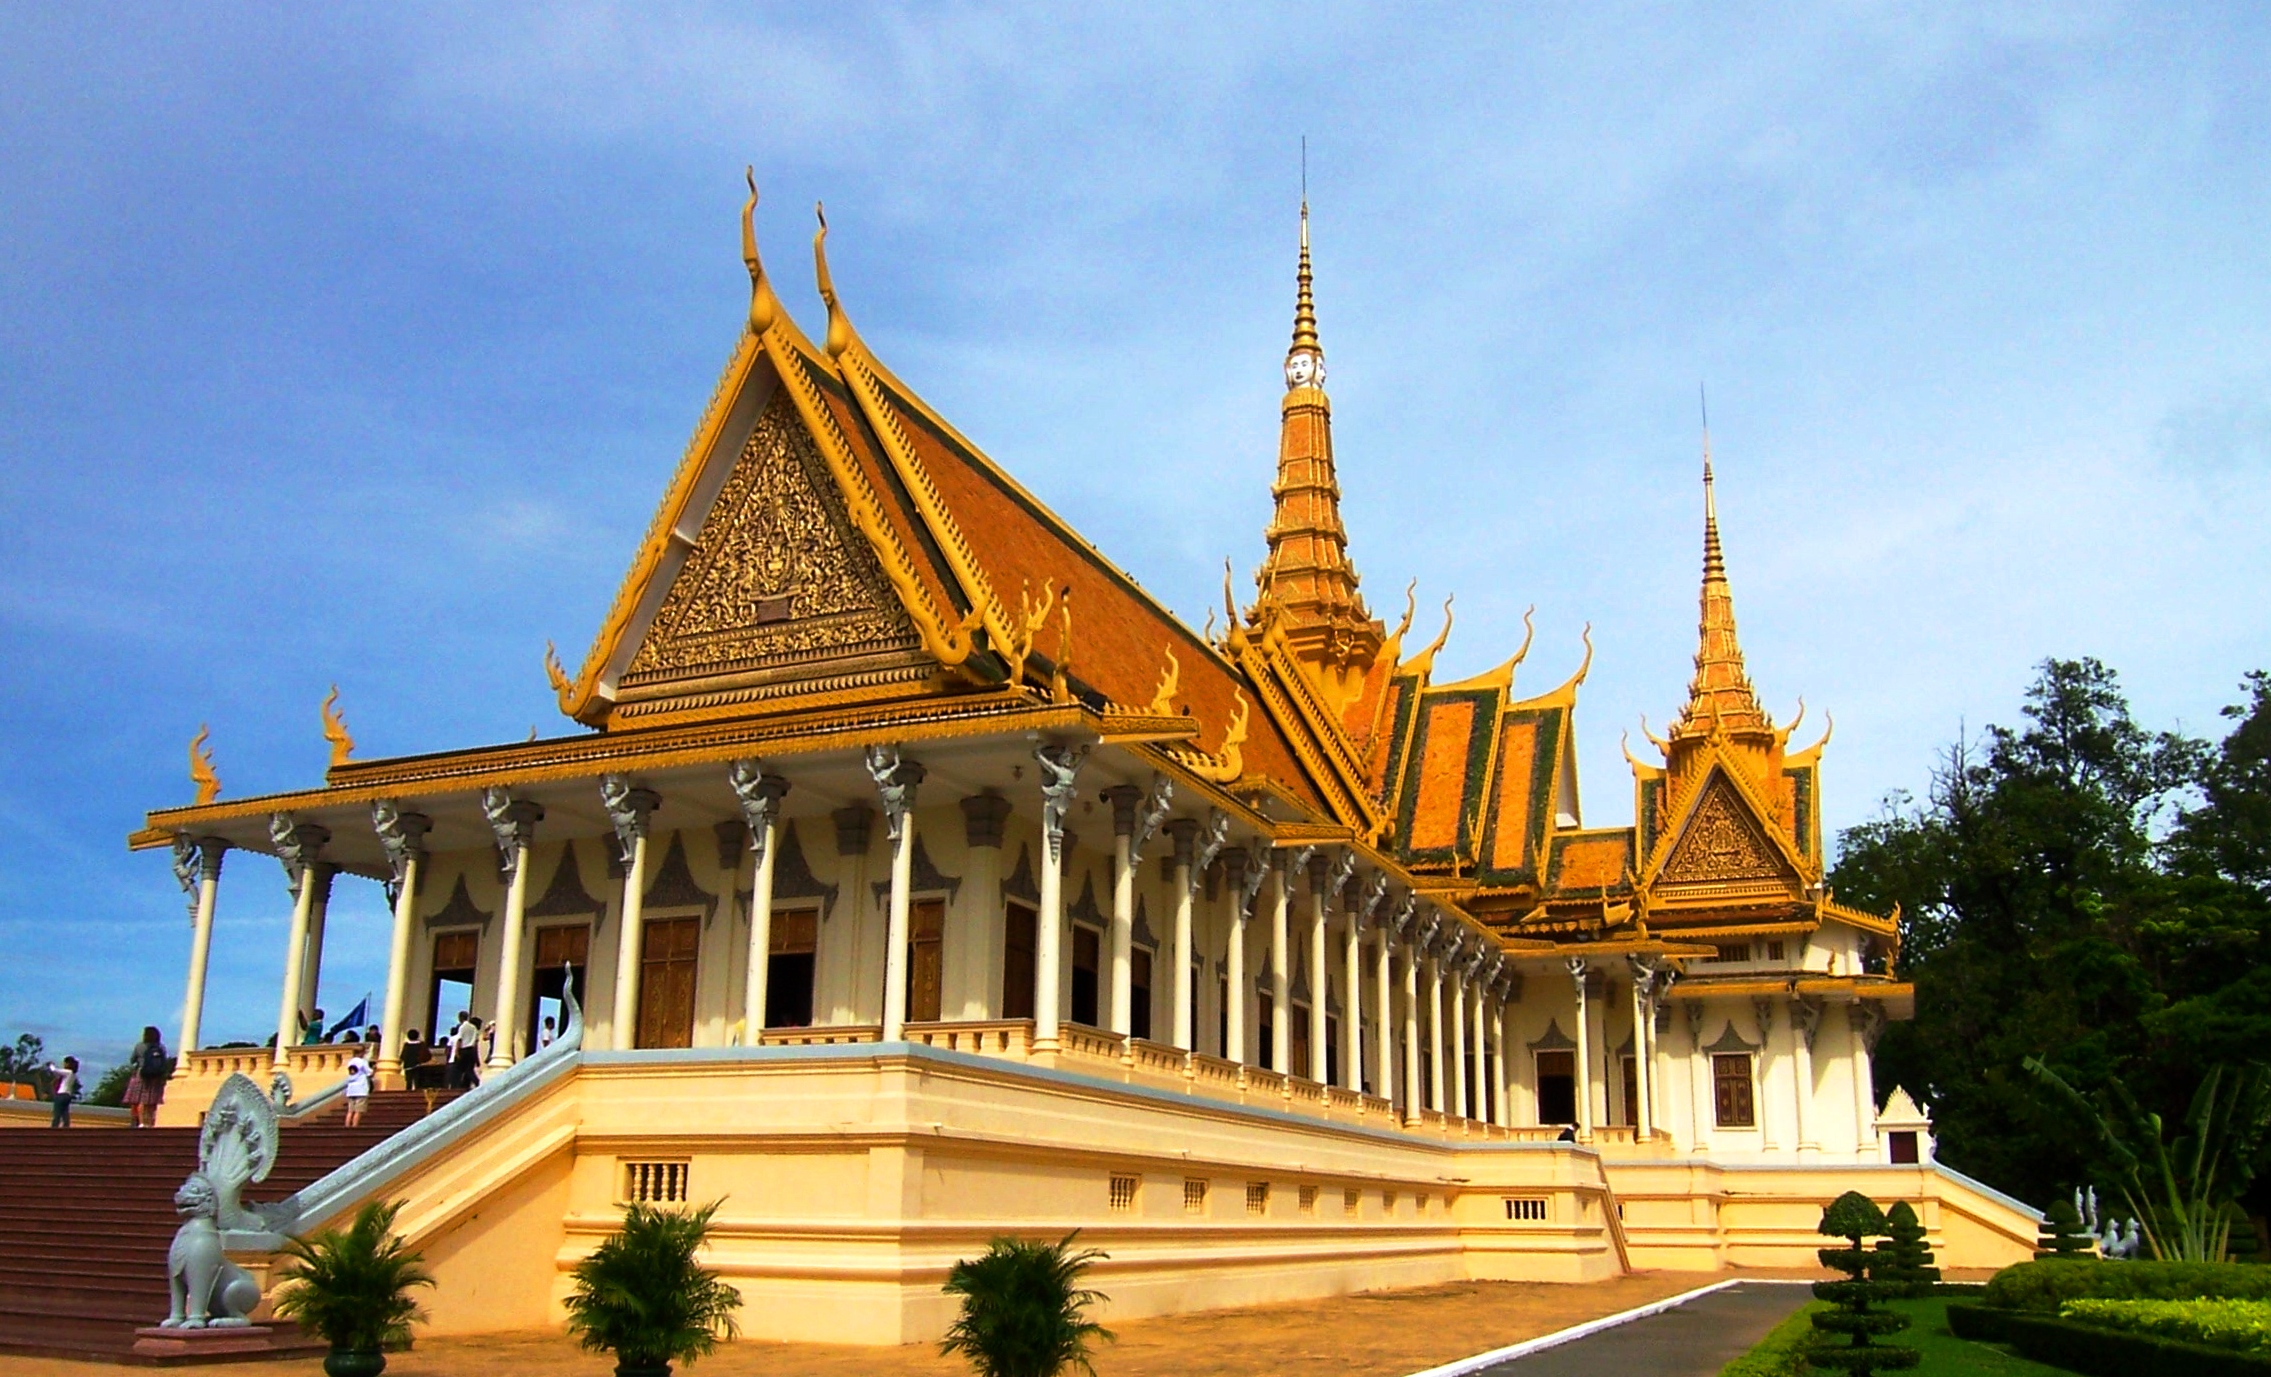 7 Fun Things To Do In Phnom Penh In 2 Days!